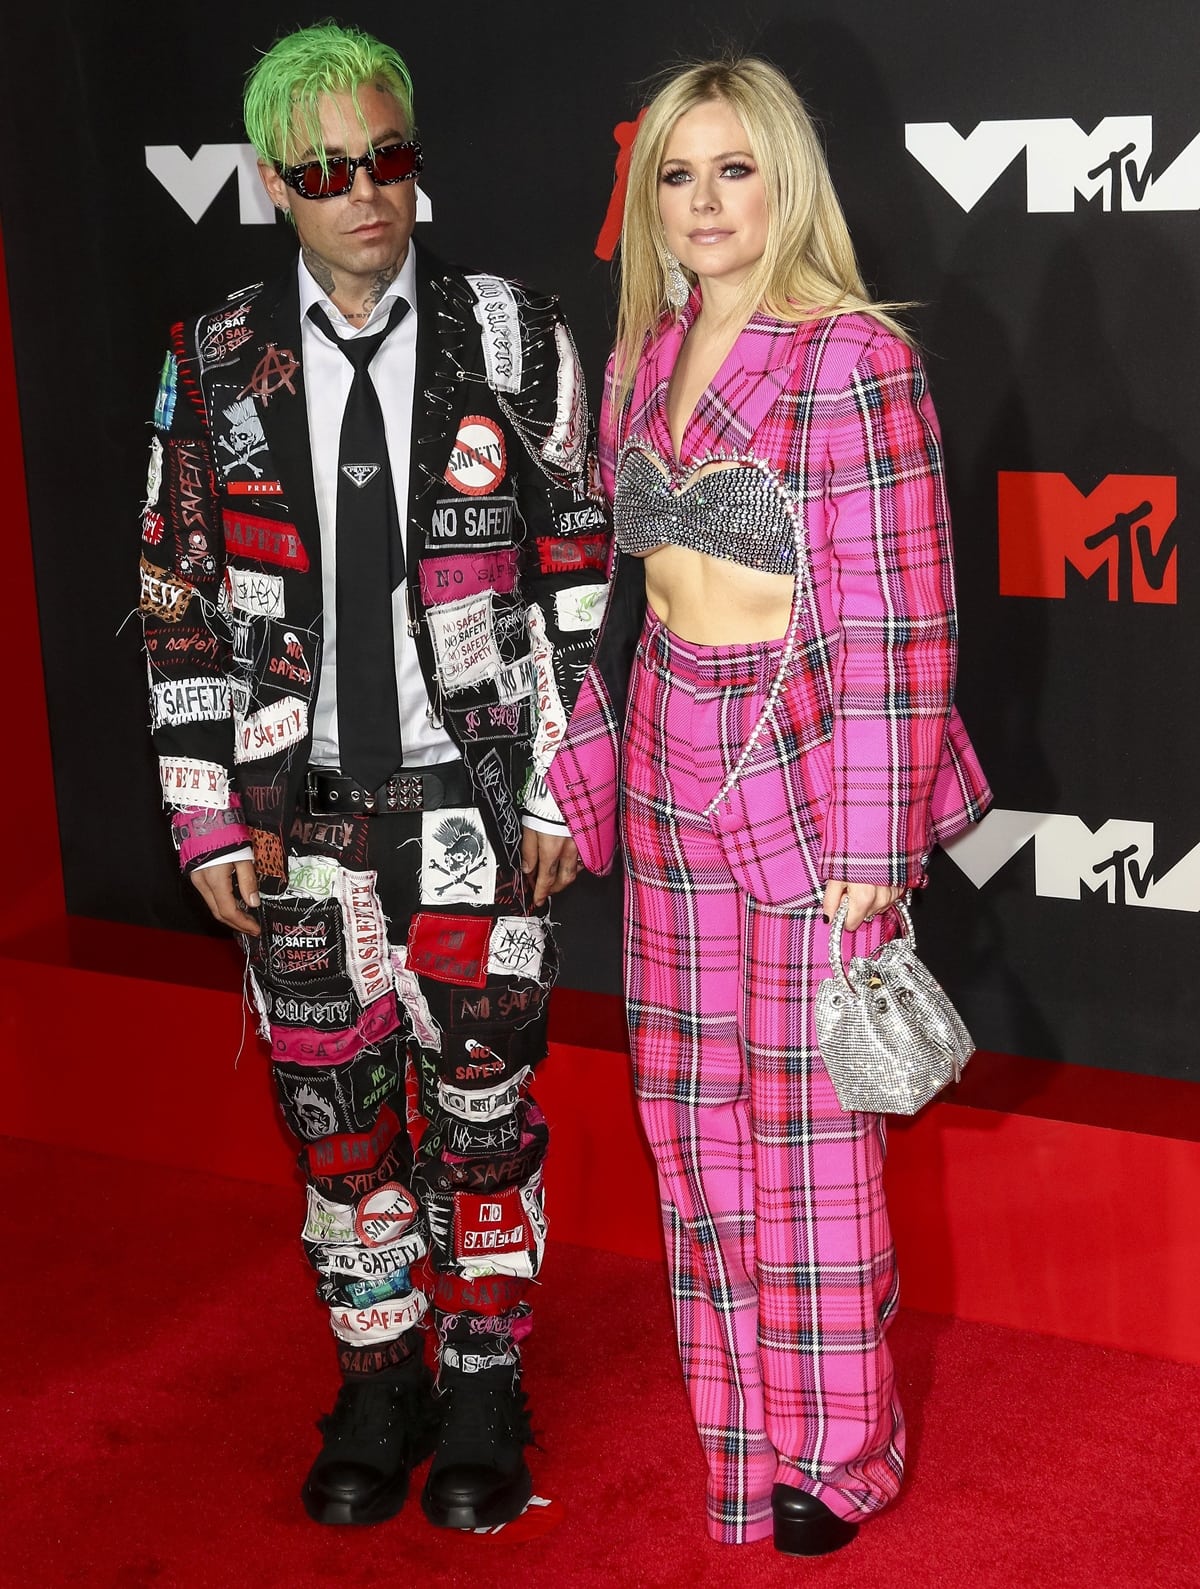 Avril Lavigne rocks a bright pink Area Pre-Fall 2021 suit with her boyfriend Mod Sun at the 2021 MTV Video Music Awards